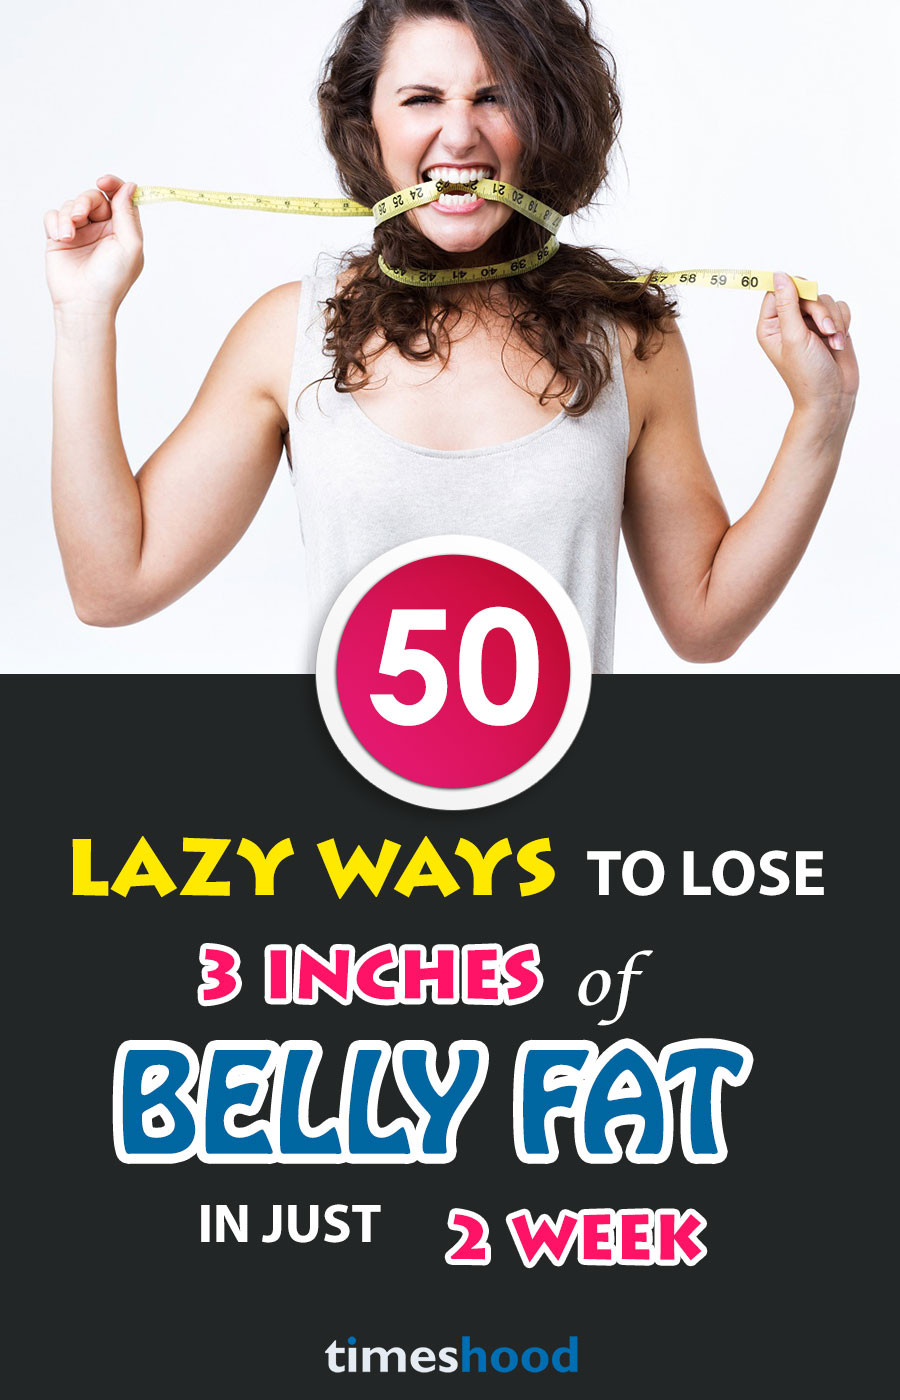 How To Lose Belly Fat Fast In 2 Weeks
 50 Lazy Ways to Lose 3 Inches of Belly Fat in 2 Weeks